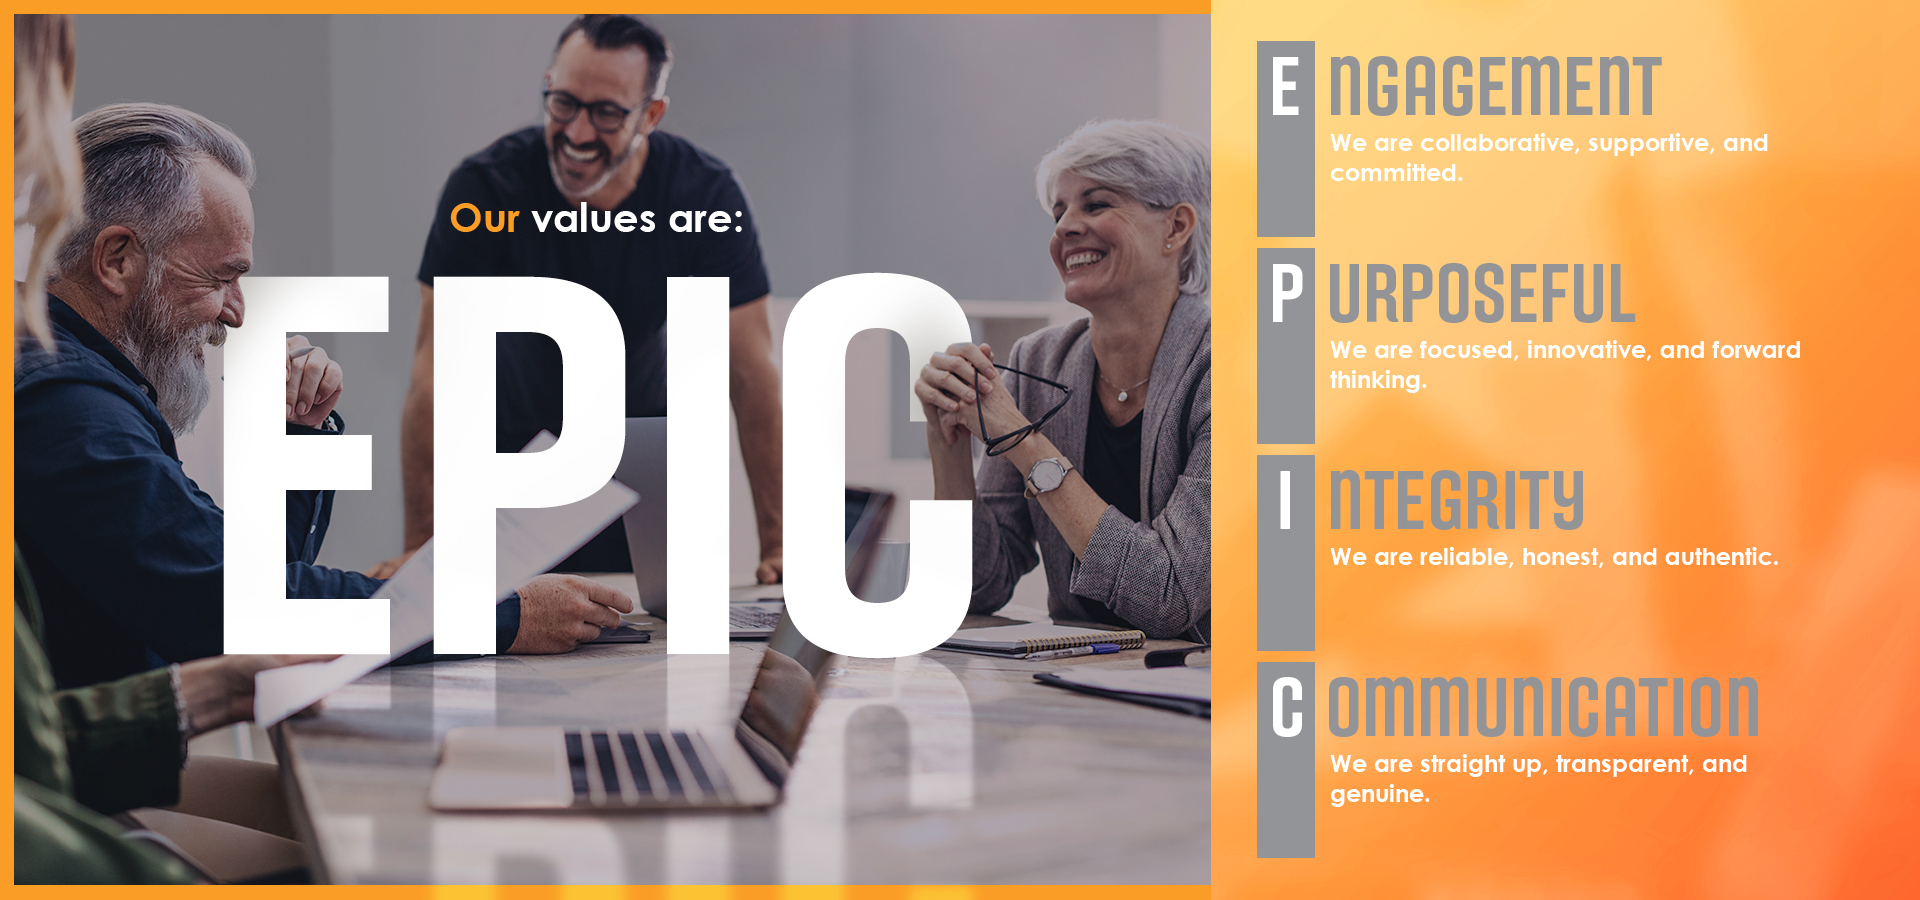 epic values - engagement, purposeful, integrity and communication are our core values